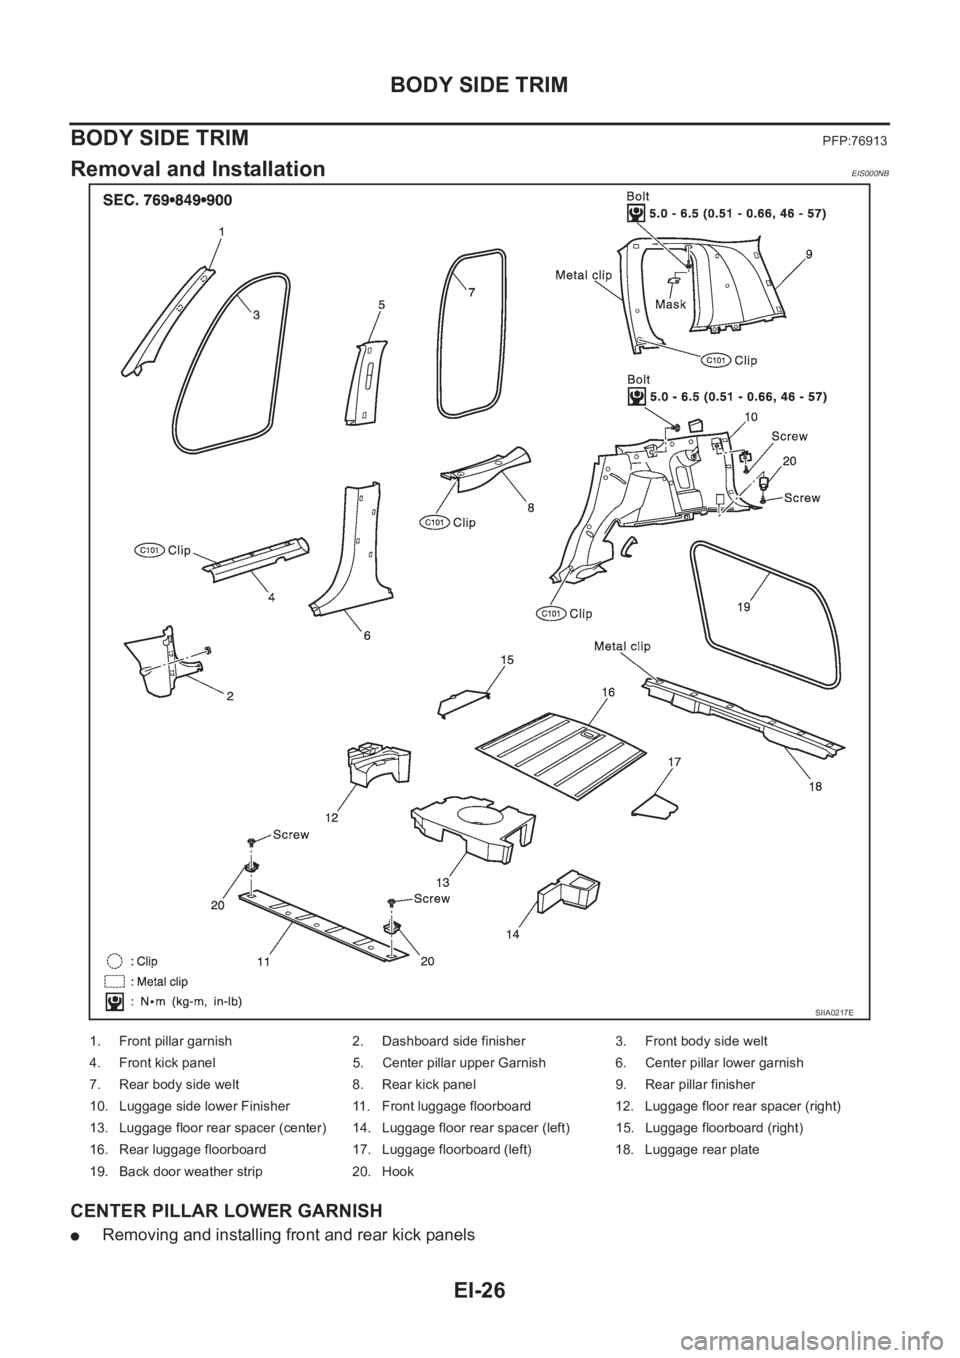 NISSAN X-TRAIL 2001  Service Repair Manual EI-26
BODY SIDE TRIM
BODY SIDE TRIM
PFP:76913
Removal and InstallationEIS000NB
CENTER PILLAR LOWER GARNISH
●Removing and installing front and rear kick panels
SIIA0217E
1. Front pillar garnish 2. Da